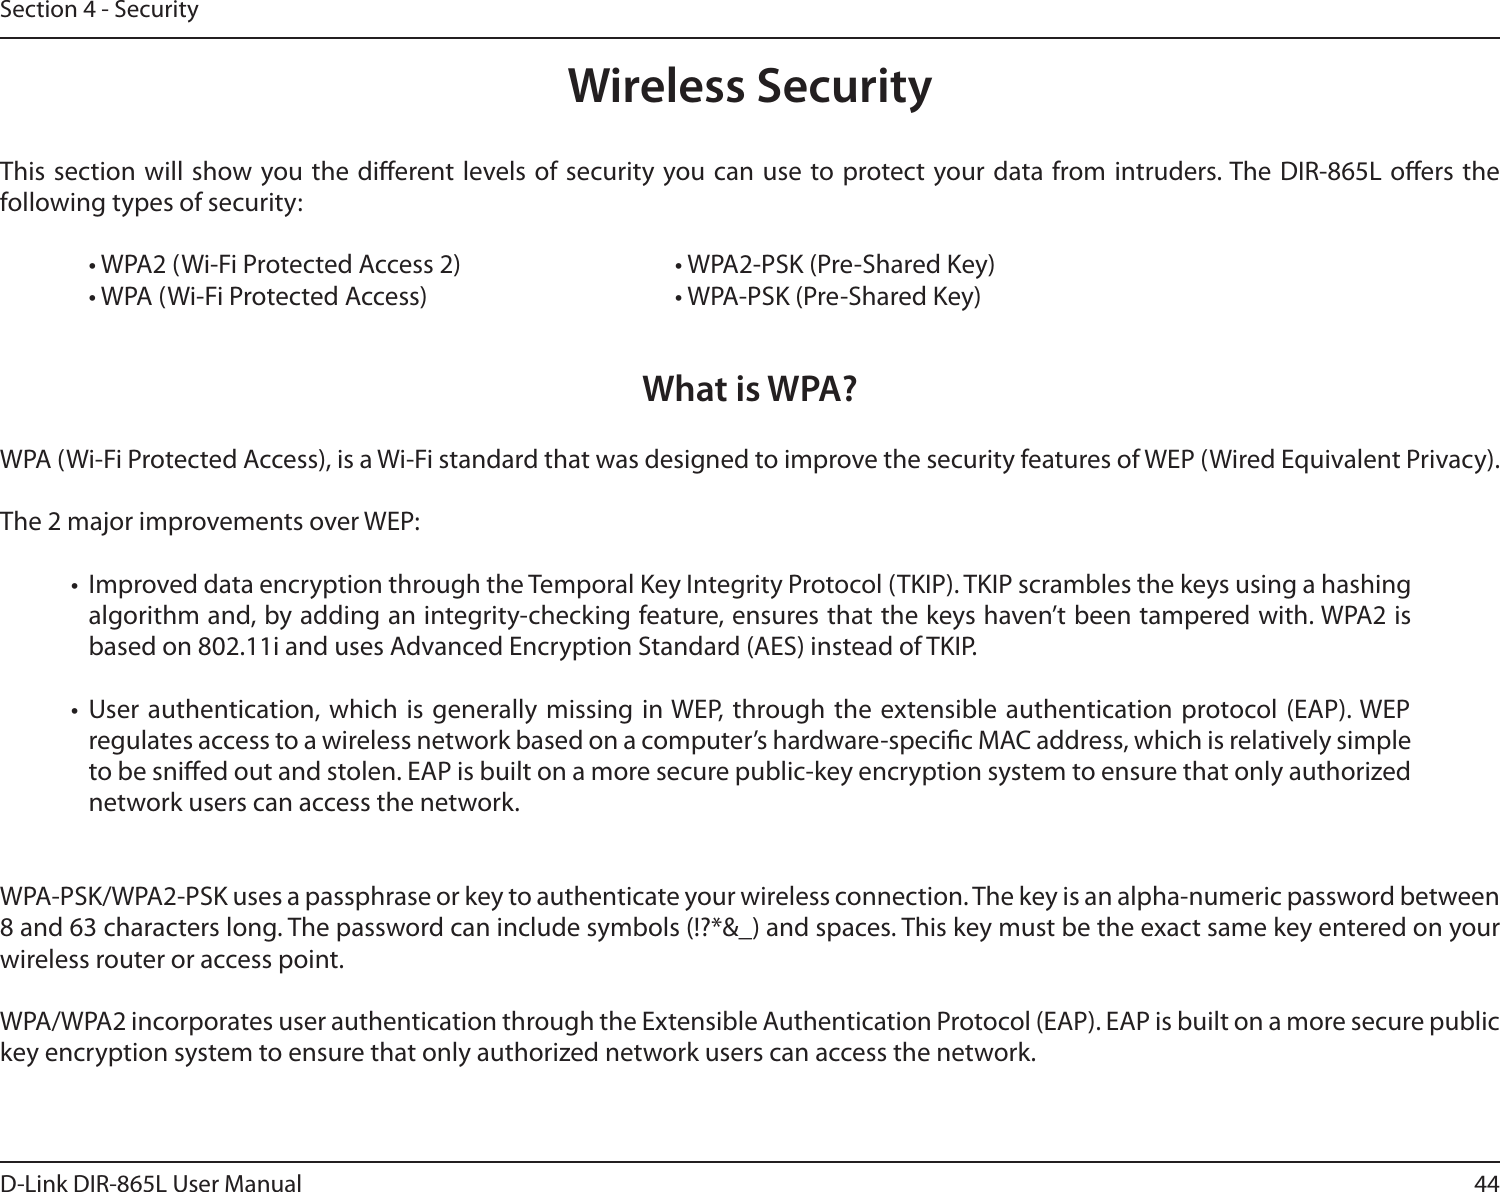 44D-Link DIR-865L User ManualSection 4 - SecurityWireless SecurityThis section will show you the dierent levels of  security you can use  to protect your data from intruders. The DIR-865L oers the following types of security:  • WPA2 (Wi-Fi Protected Access 2)       • WPA2-PSK (Pre-Shared Key)  • WPA (Wi-Fi Protected Access)        • WPA-PSK (Pre-Shared Key)What is WPA?WPA (Wi-Fi Protected Access), is a Wi-Fi standard that was designed to improve the security features of WEP (Wired Equivalent Privacy).  The 2 major improvements over WEP: •  Improved data encryption through the Temporal Key Integrity Protocol (TKIP). TKIP scrambles the keys using a hashing algorithm and, by adding an integrity-checking feature, ensures that the keys haven’t been tampered with. WPA2 is based on 802.11i and uses Advanced Encryption Standard (AES) instead of TKIP.•  User authentication, which is generally missing in WEP, through the extensible authentication protocol (EAP). WEP regulates access to a wireless network based on a computer’s hardware-specic MAC address, which is relatively simple to be snied out and stolen. EAP is built on a more secure public-key encryption system to ensure that only authorized network users can access the network.WPA-PSK/WPA2-PSK uses a passphrase or key to authenticate your wireless connection. The key is an alpha-numeric password between 8 and 63 characters long. The password can include symbols (!?*&amp;_) and spaces. This key must be the exact same key entered on your wireless router or access point.WPA/WPA2 incorporates user authentication through the Extensible Authentication Protocol (EAP). EAP is built on a more secure public key encryption system to ensure that only authorized network users can access the network.